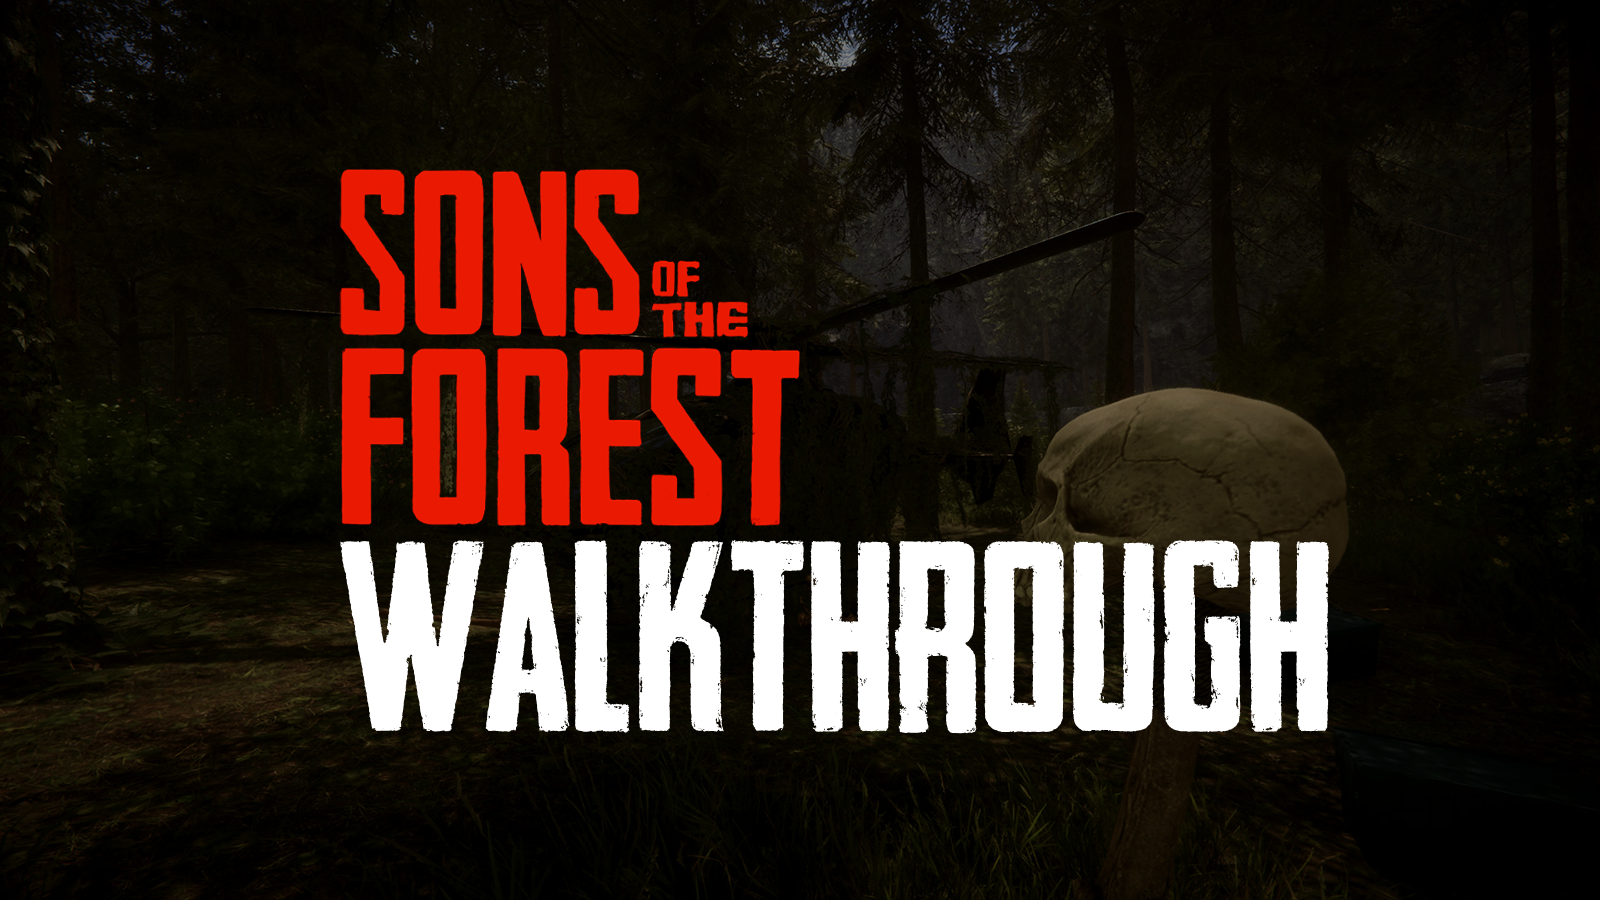 sons of the forest walkthrough featured image v2